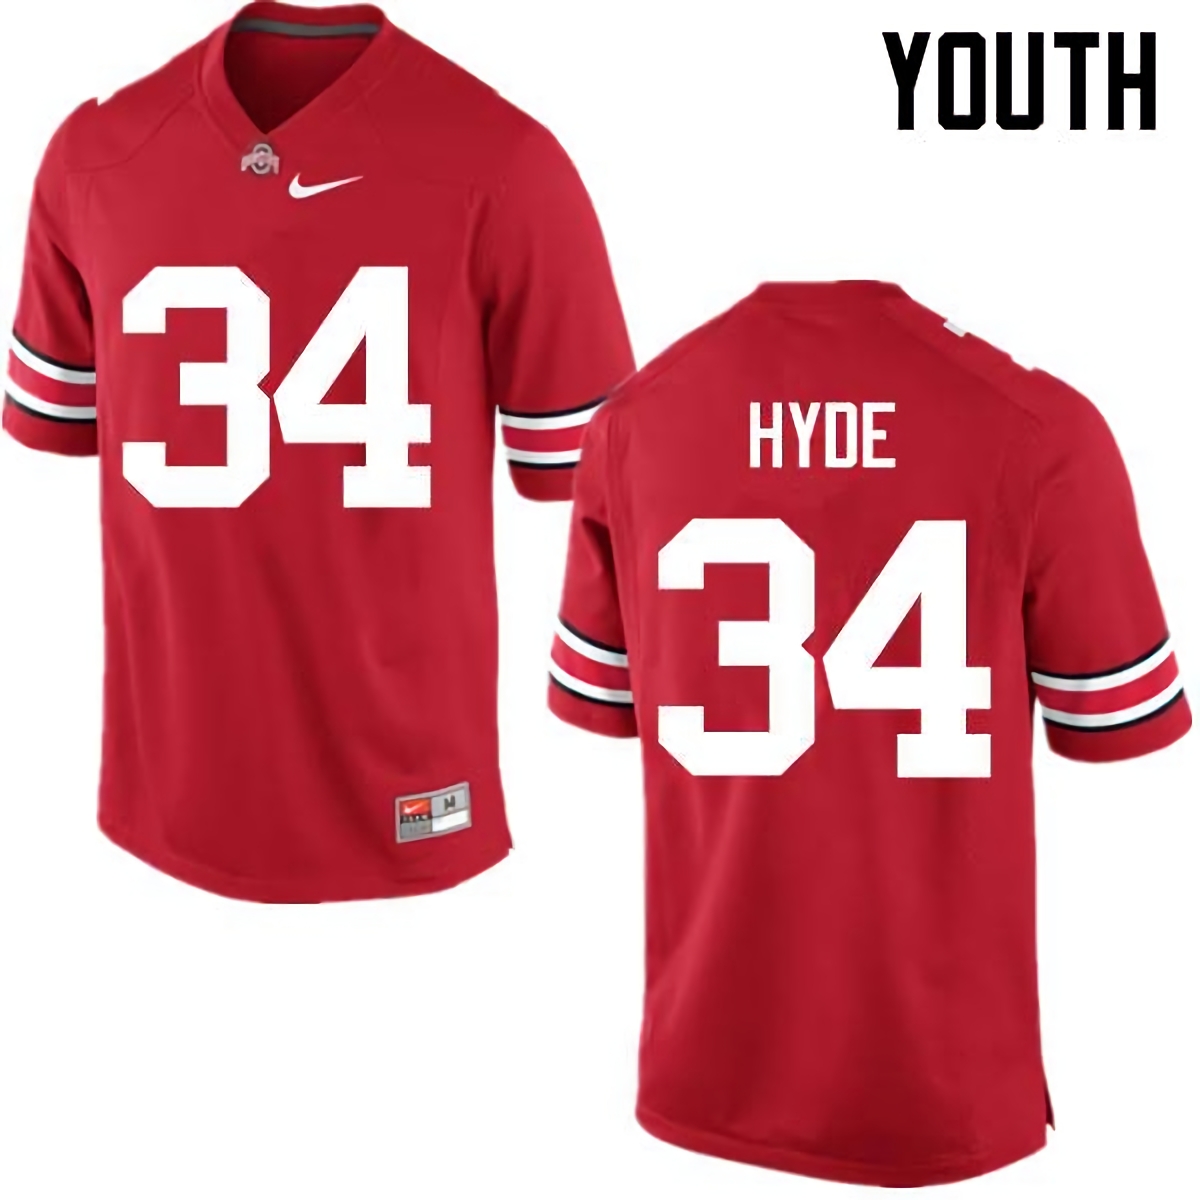 Carlos Hyde Ohio State Buckeyes Youth NCAA #34 Nike Red College Stitched Football Jersey QOU7556MT